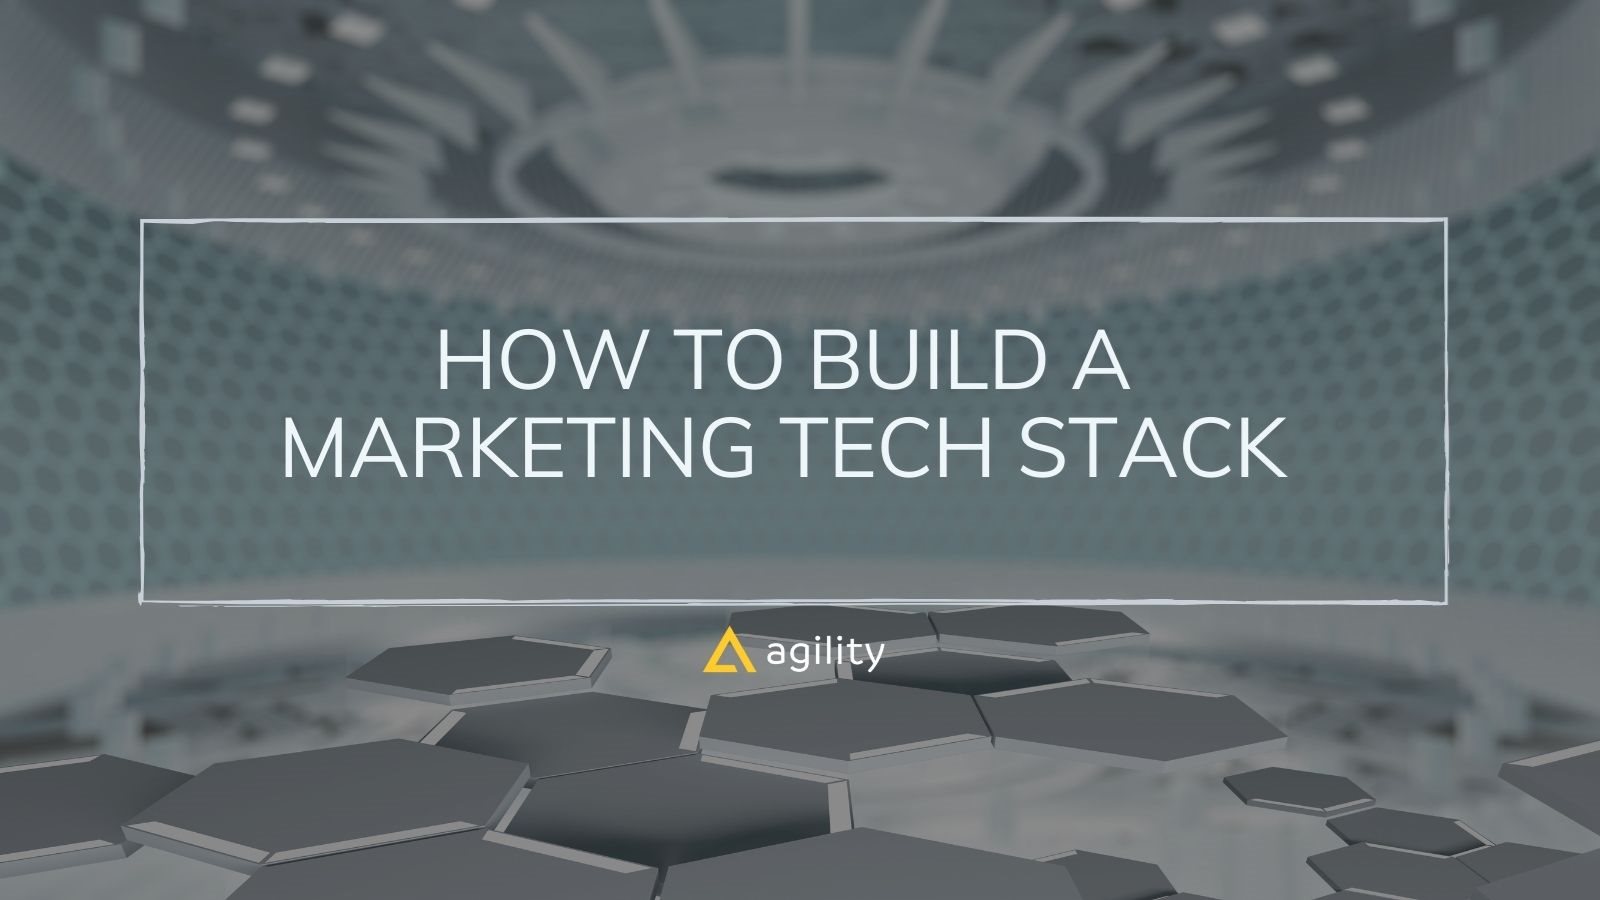 How To Build A Marketing Tech Stack